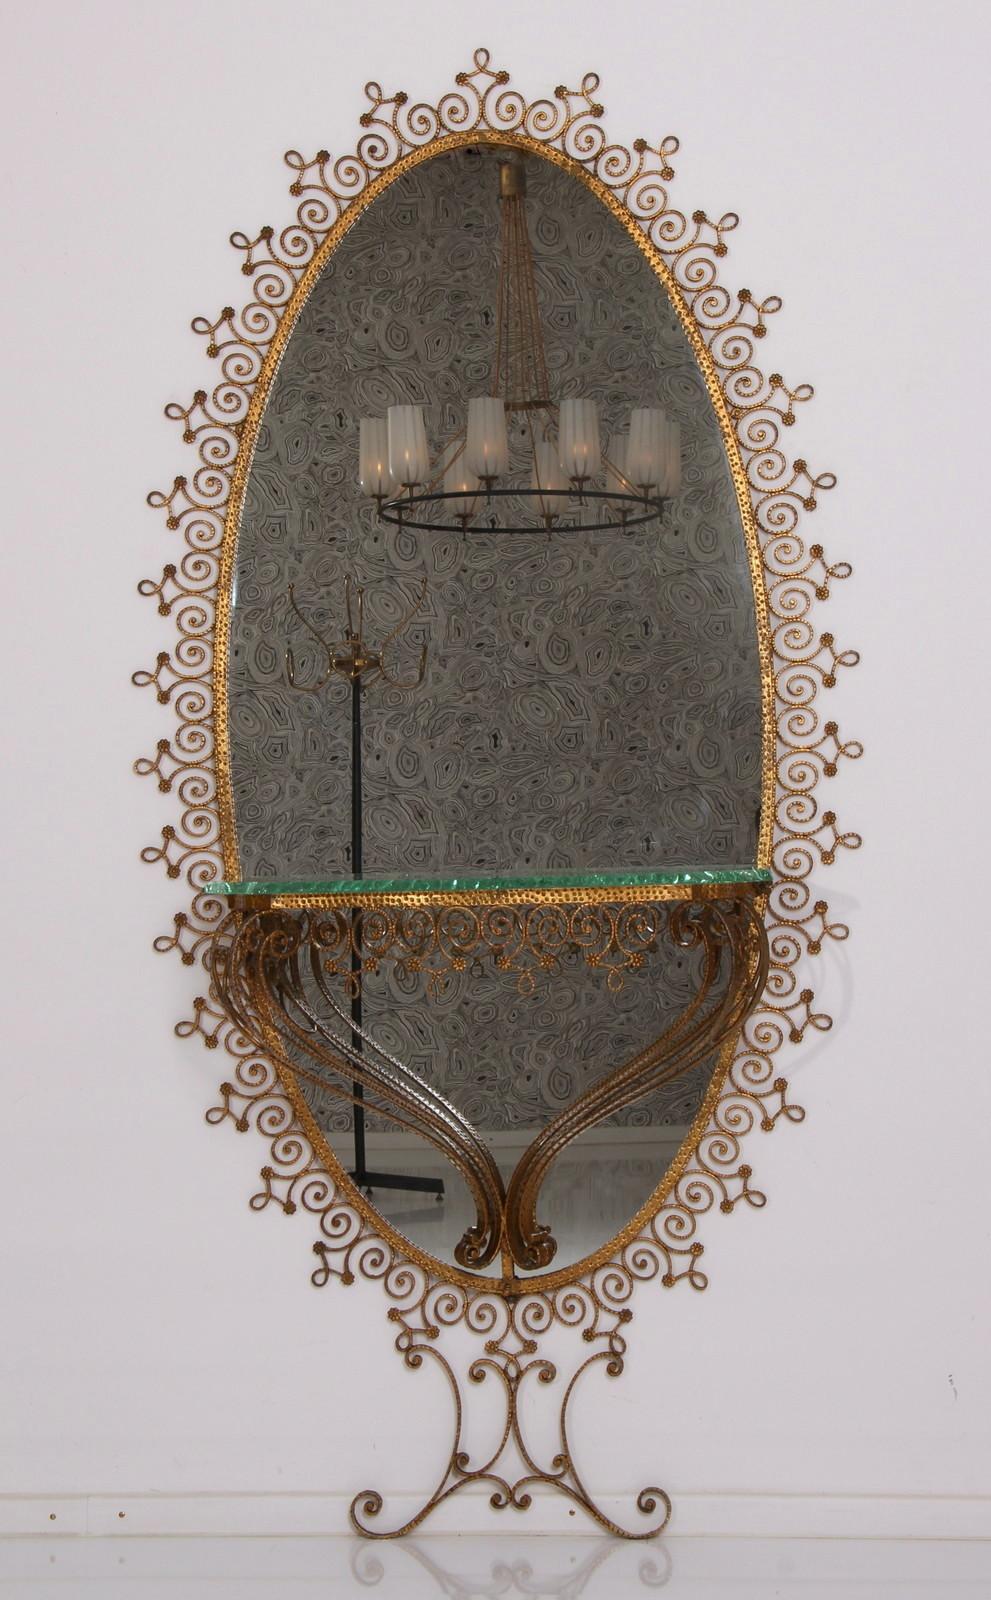 A gold, vintage Mid-Century Modern Italian full Size floor mirror made of handcrafted gilded wrought iron with its original mirrored glass, designed by Pier Luigi Colli in very good condition. 
The oval wall mirror is composed with a console table